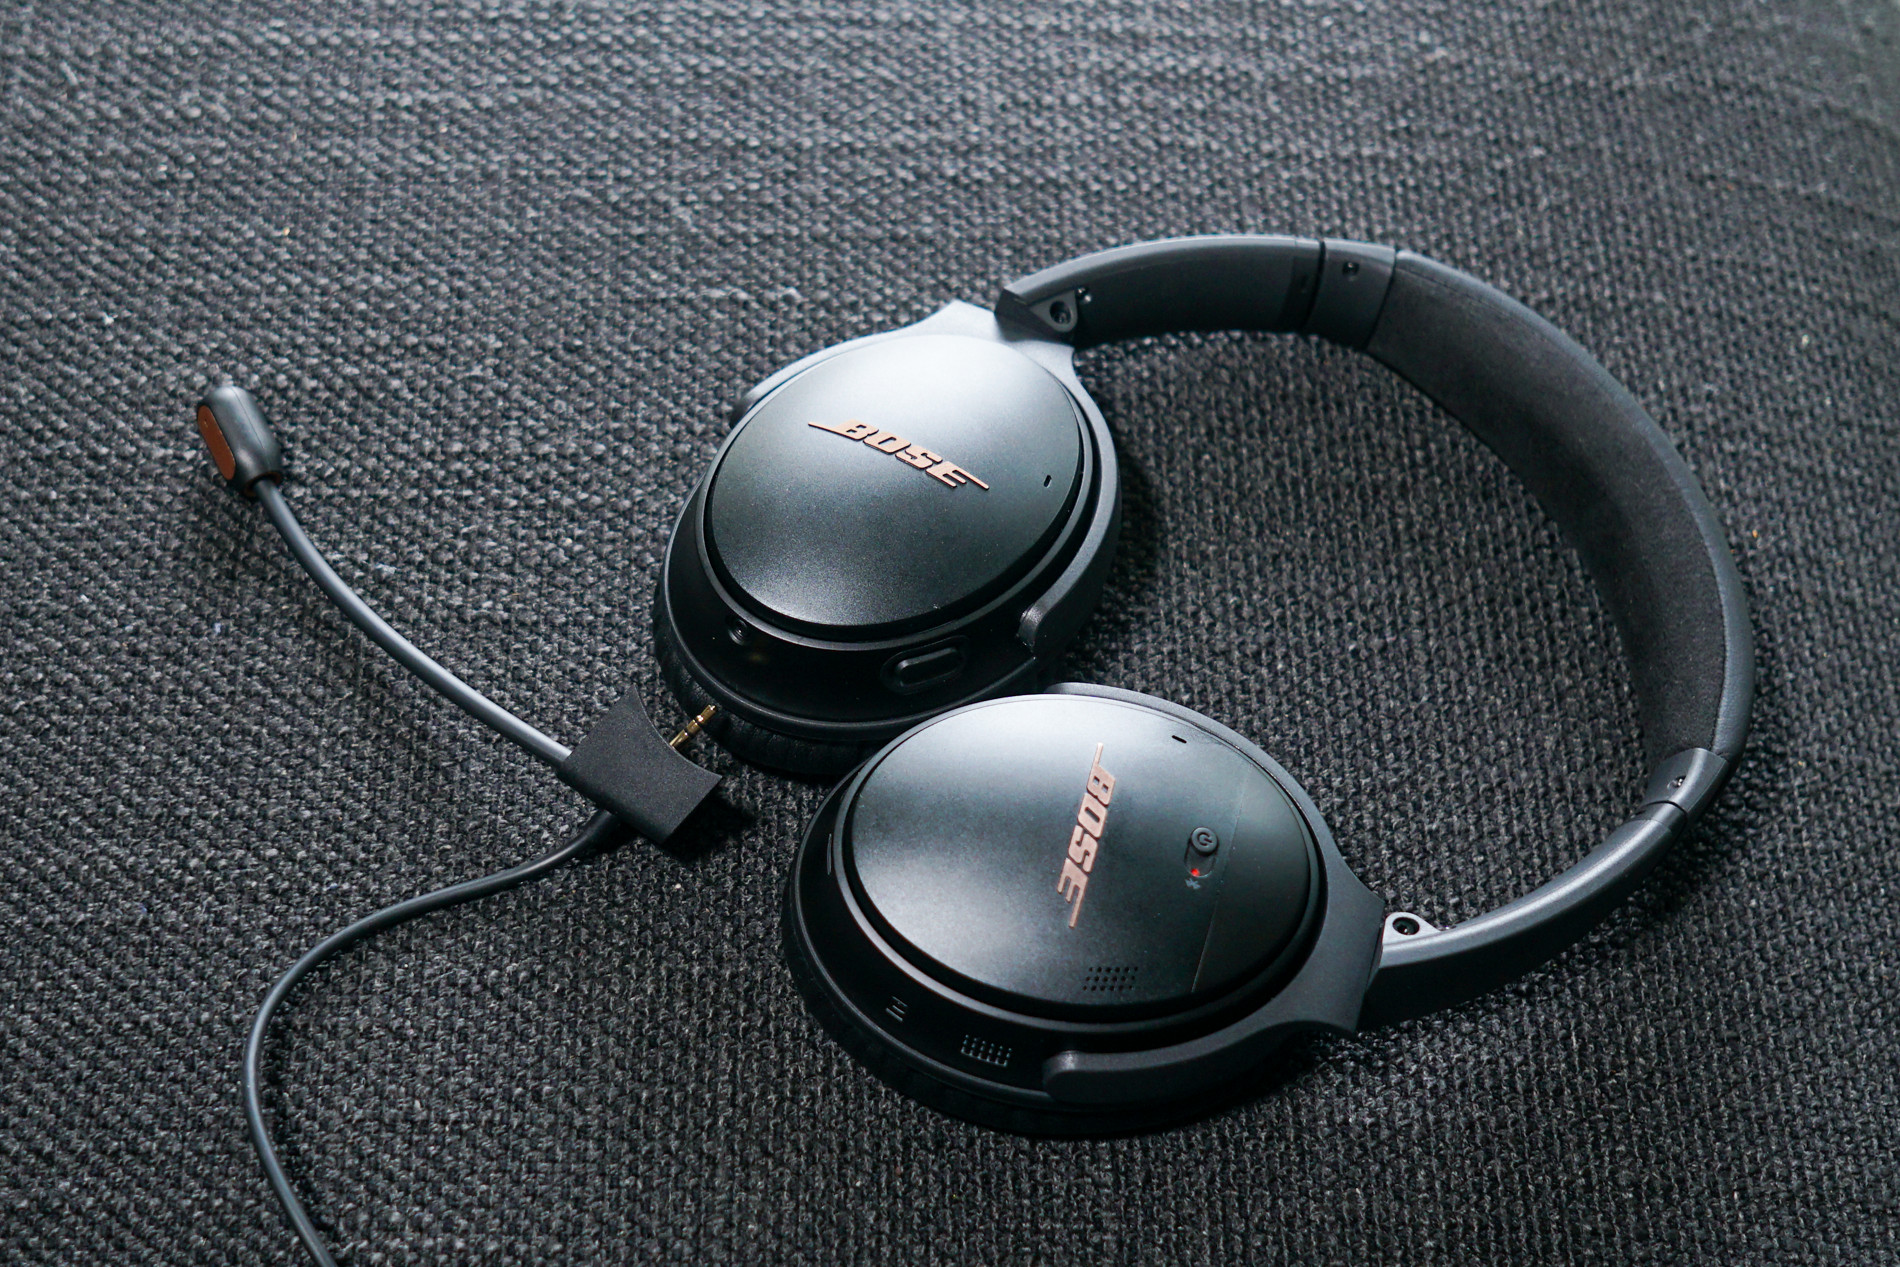 The Bose QuietComfort 35 II Gaming Headset lays on a fabric surface next to its detachable microphone.